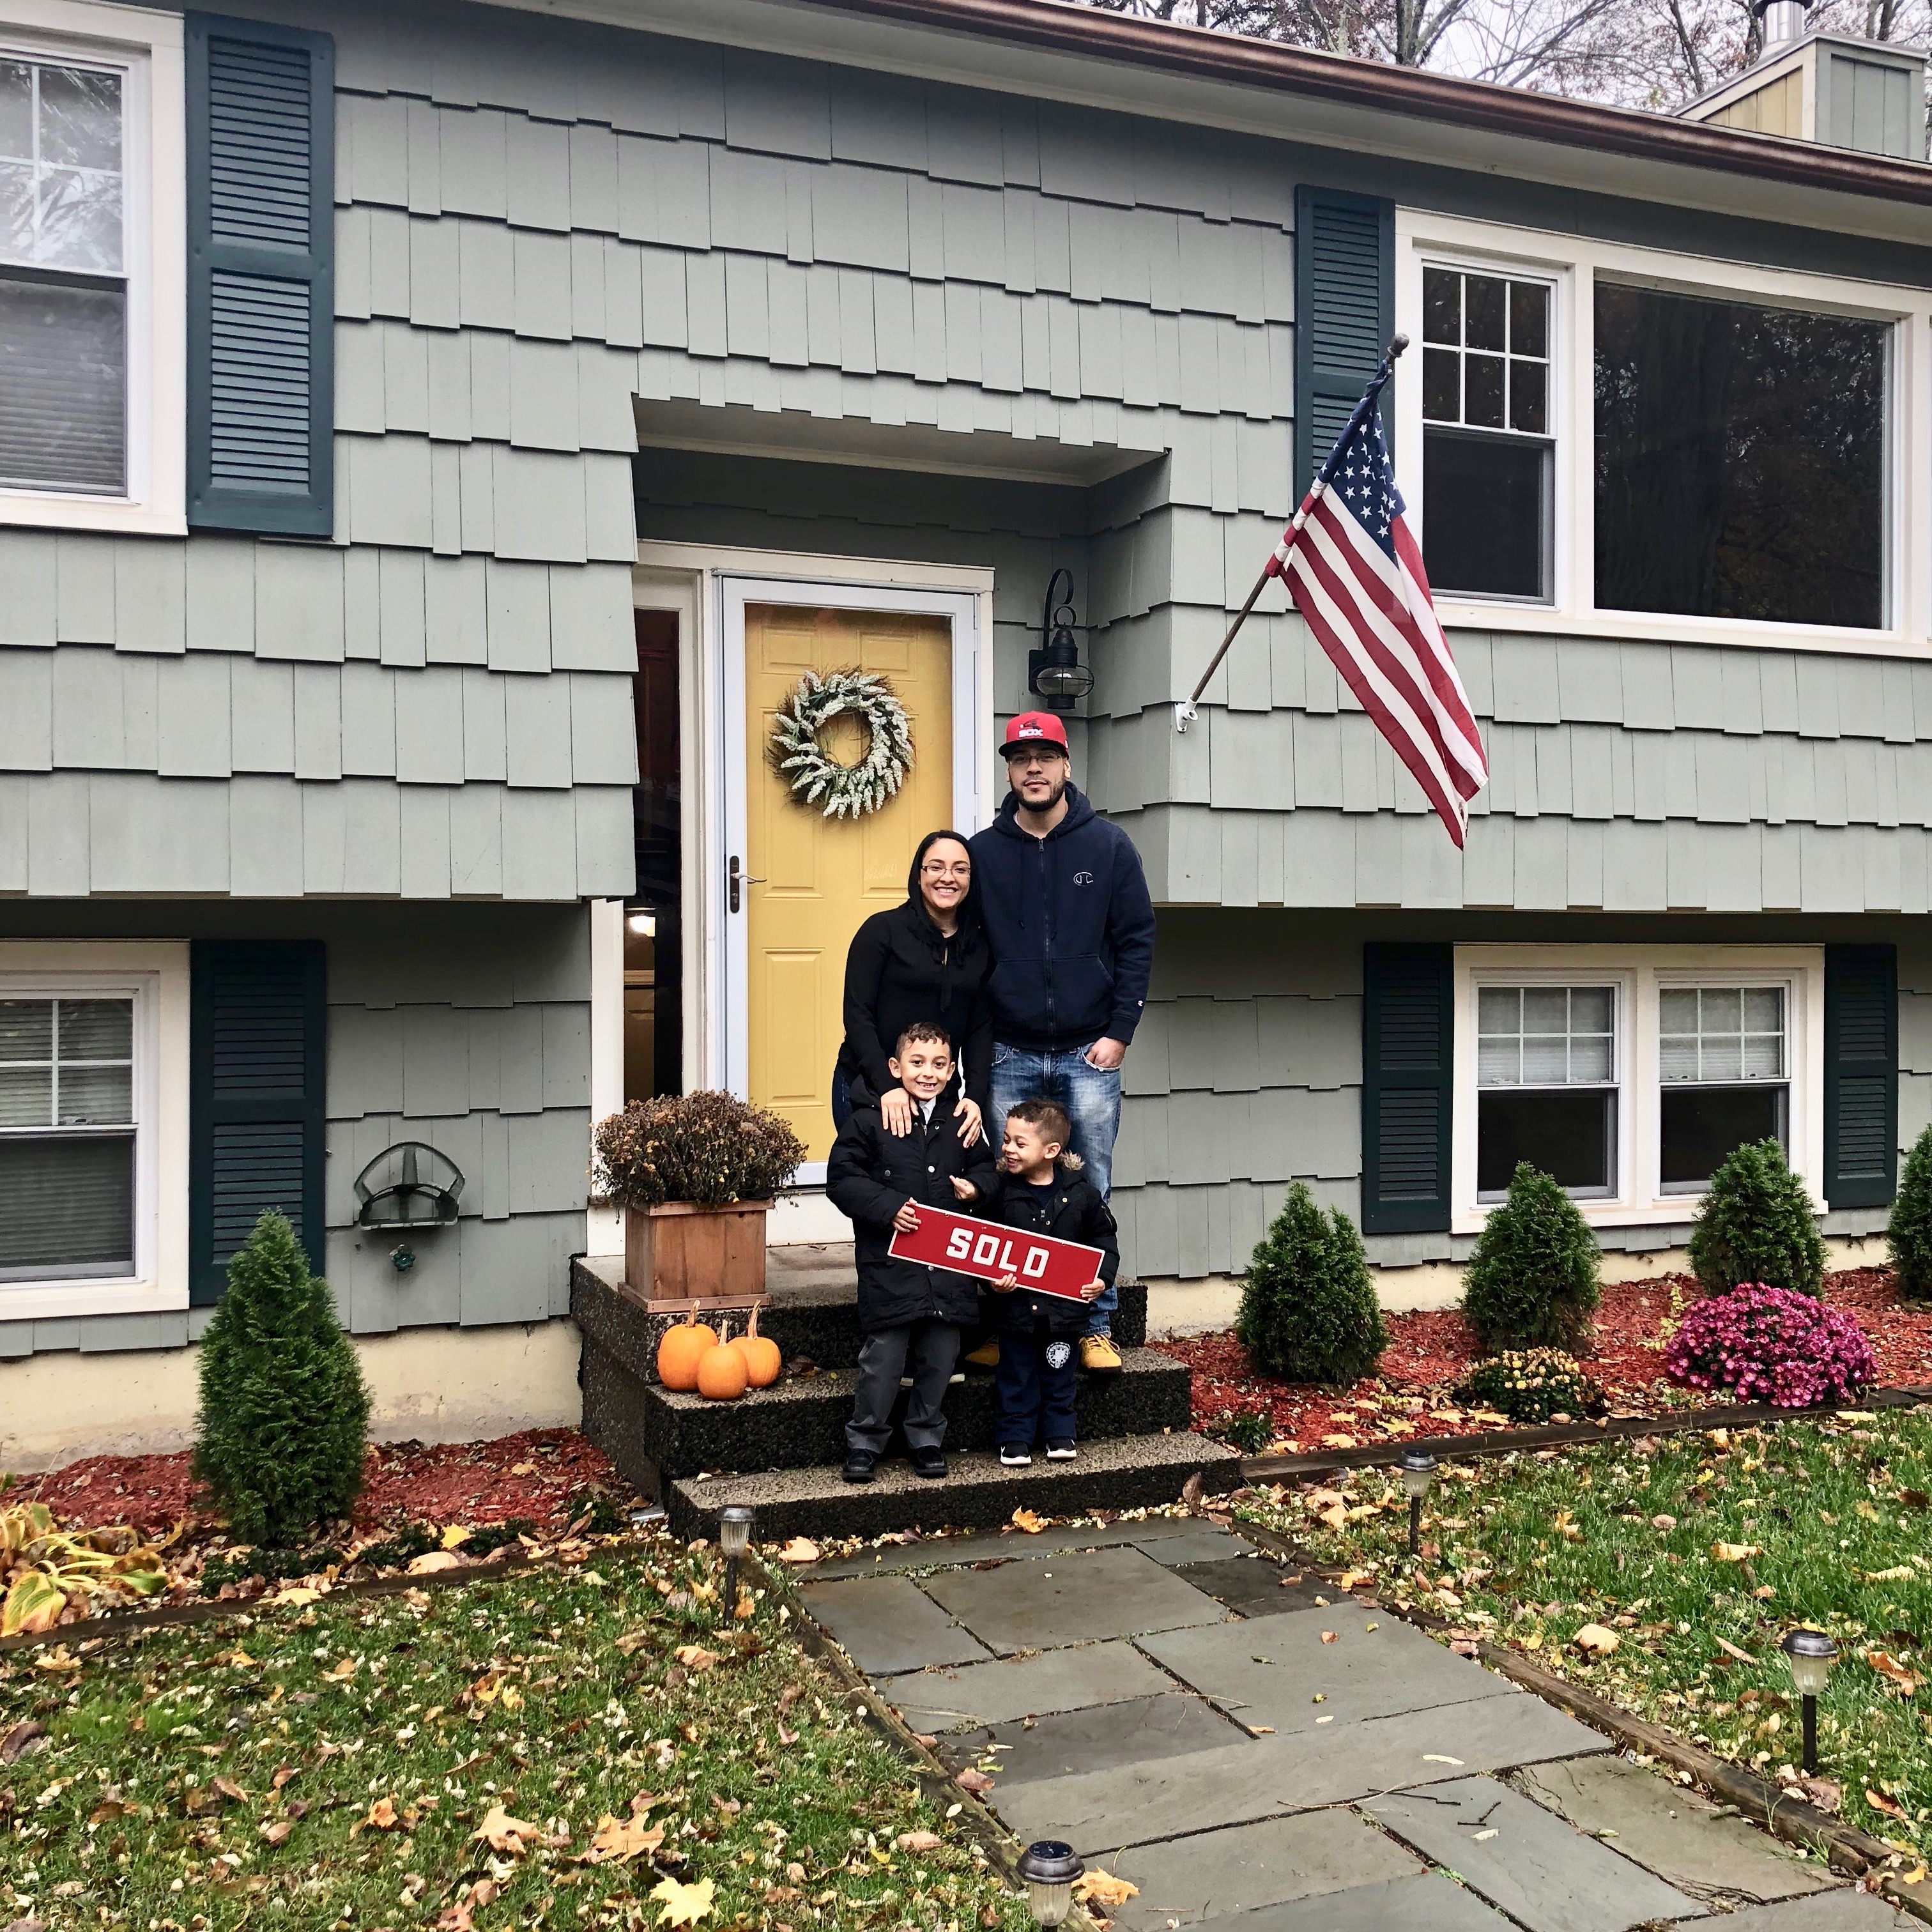 Find your Homes for the Holidays in Connecticut